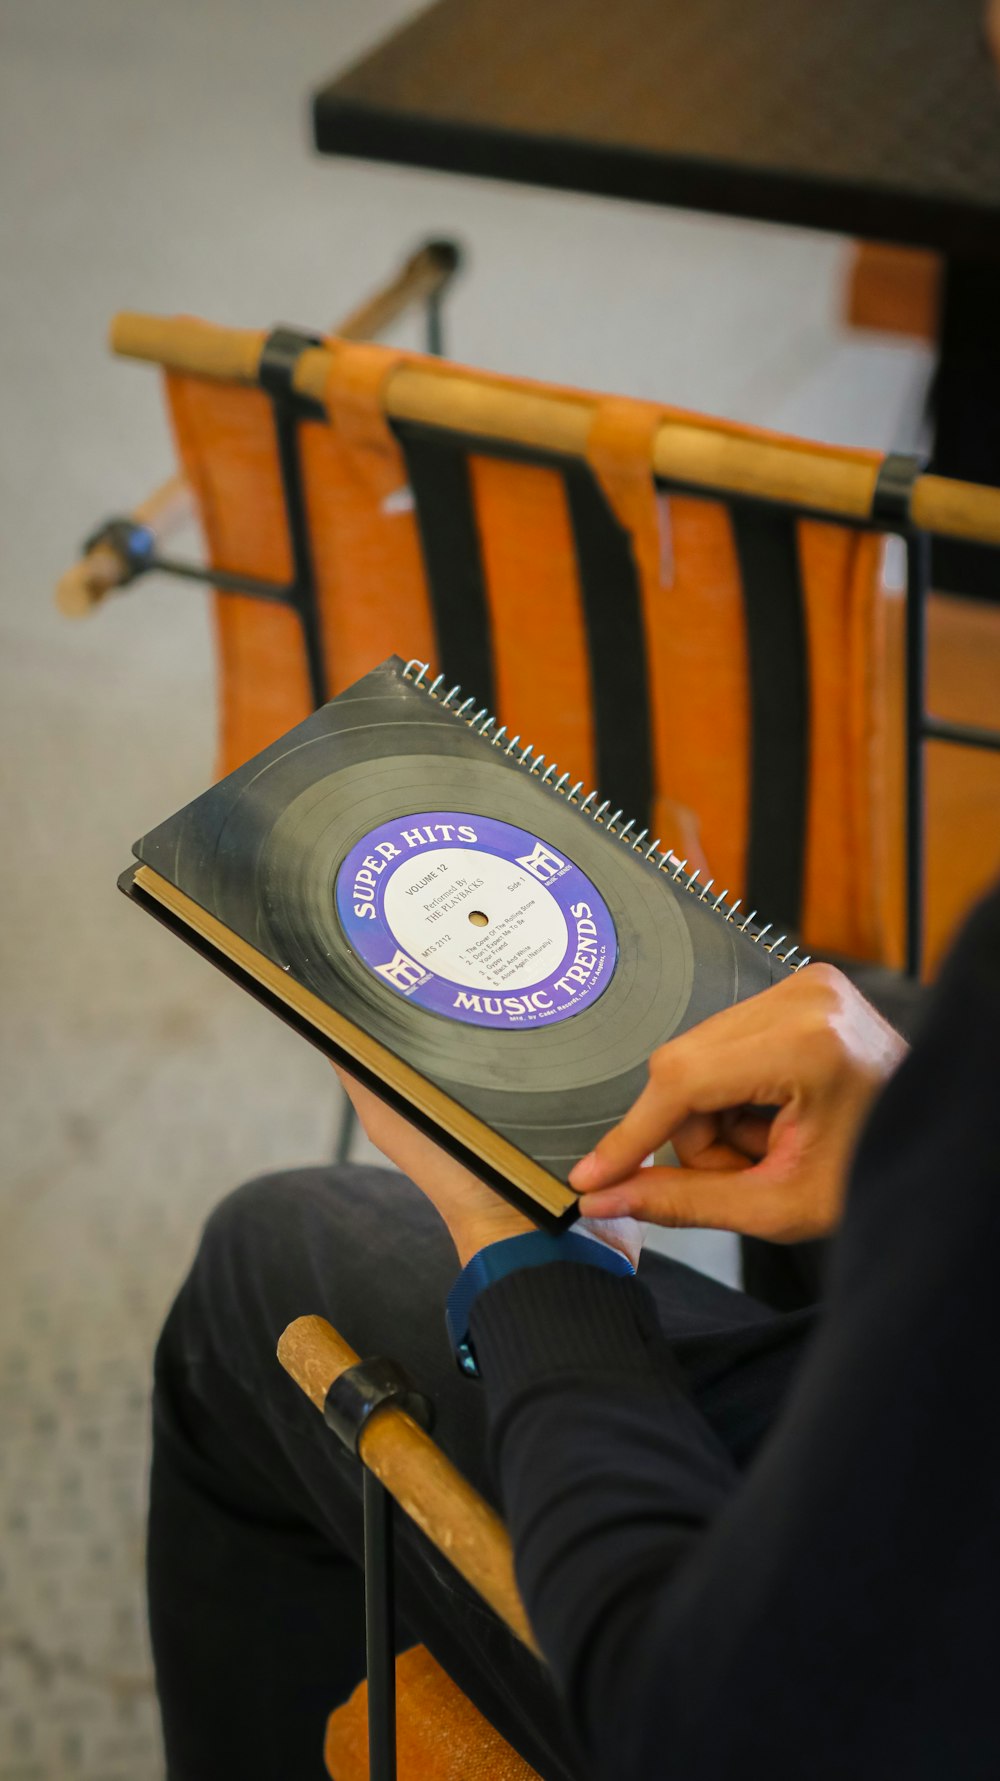 a man sitting in a chair holding a record